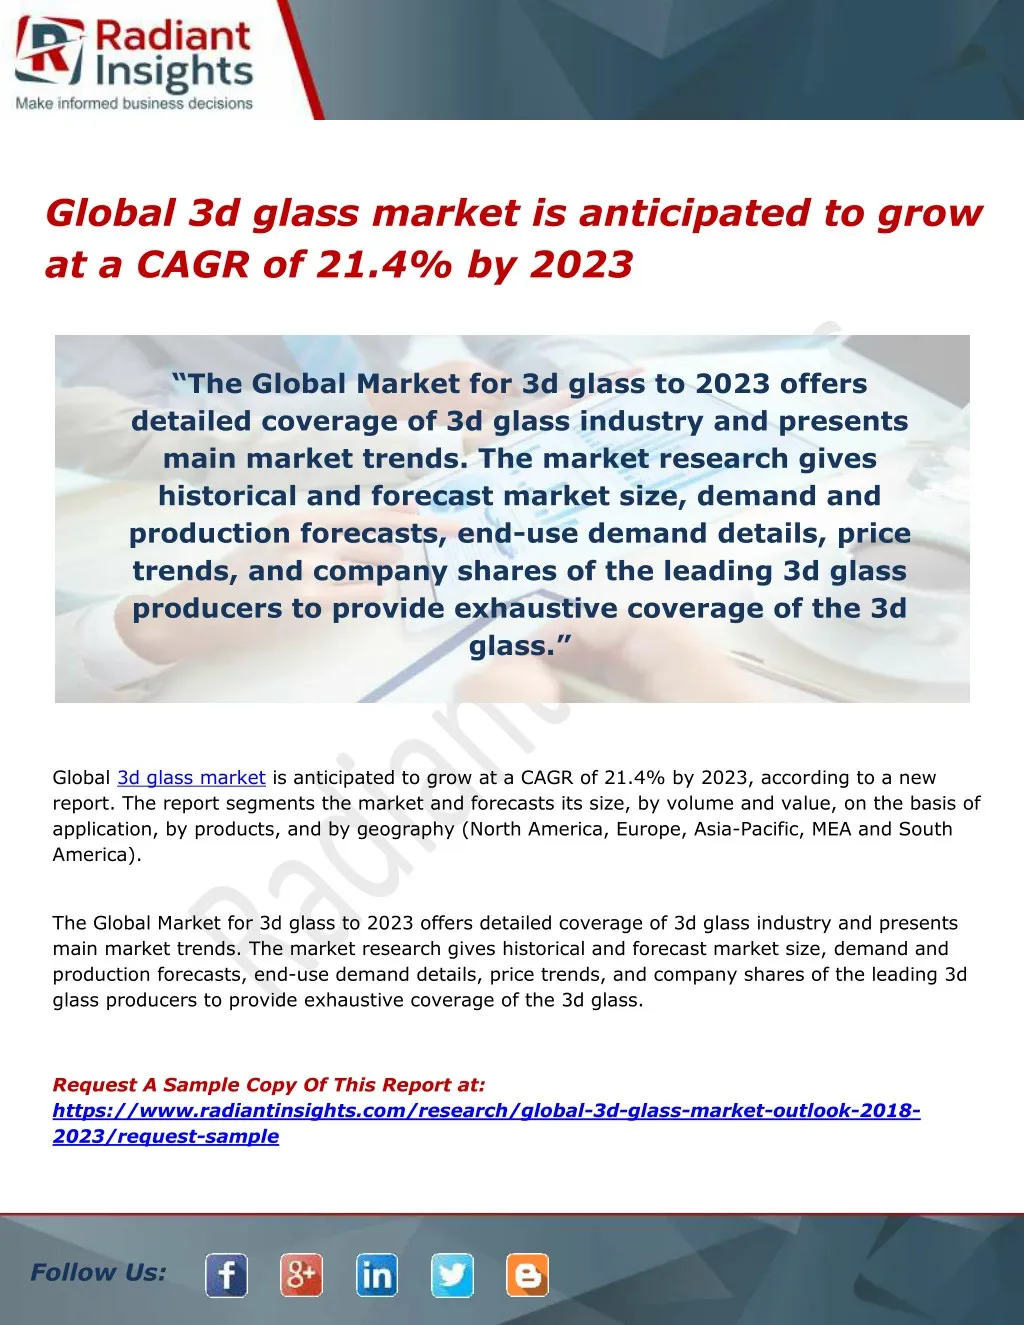 global 3d glass market is anticipated to grow